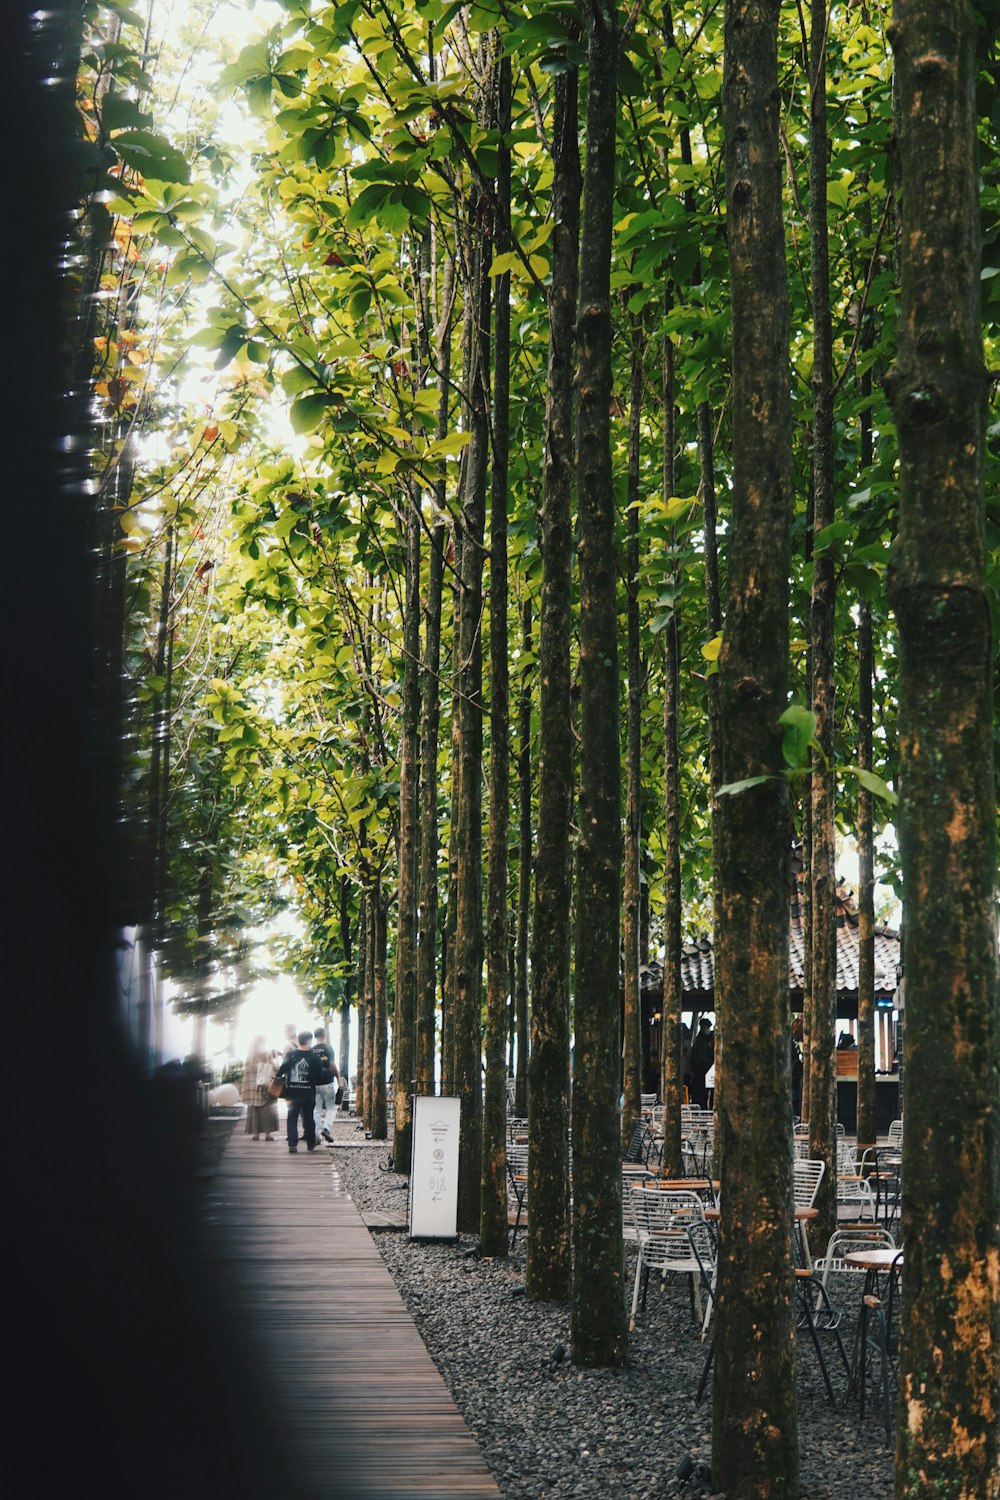 a group of people walking through a forest filled with trees